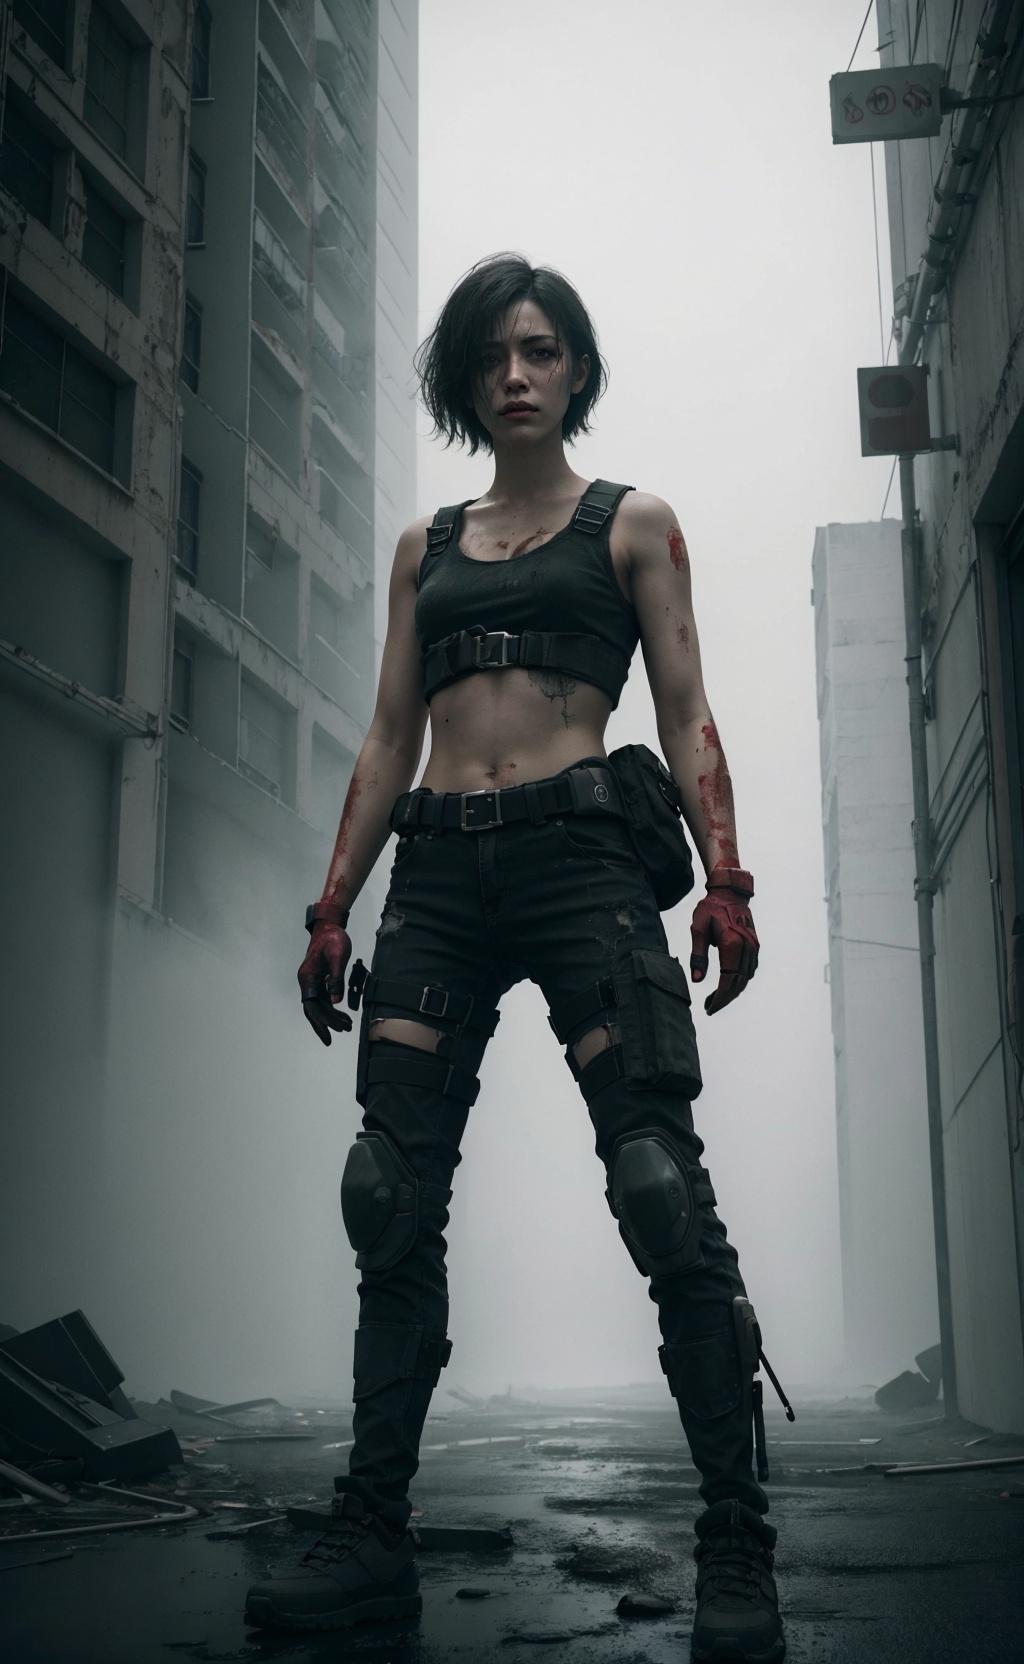 1girl, Gritty neon, synthetic textures, modded limbs, worn materials, atmospheric fog, rebellious stances, urban decay, layered storytelling, sci-fi tech, dystopian settings